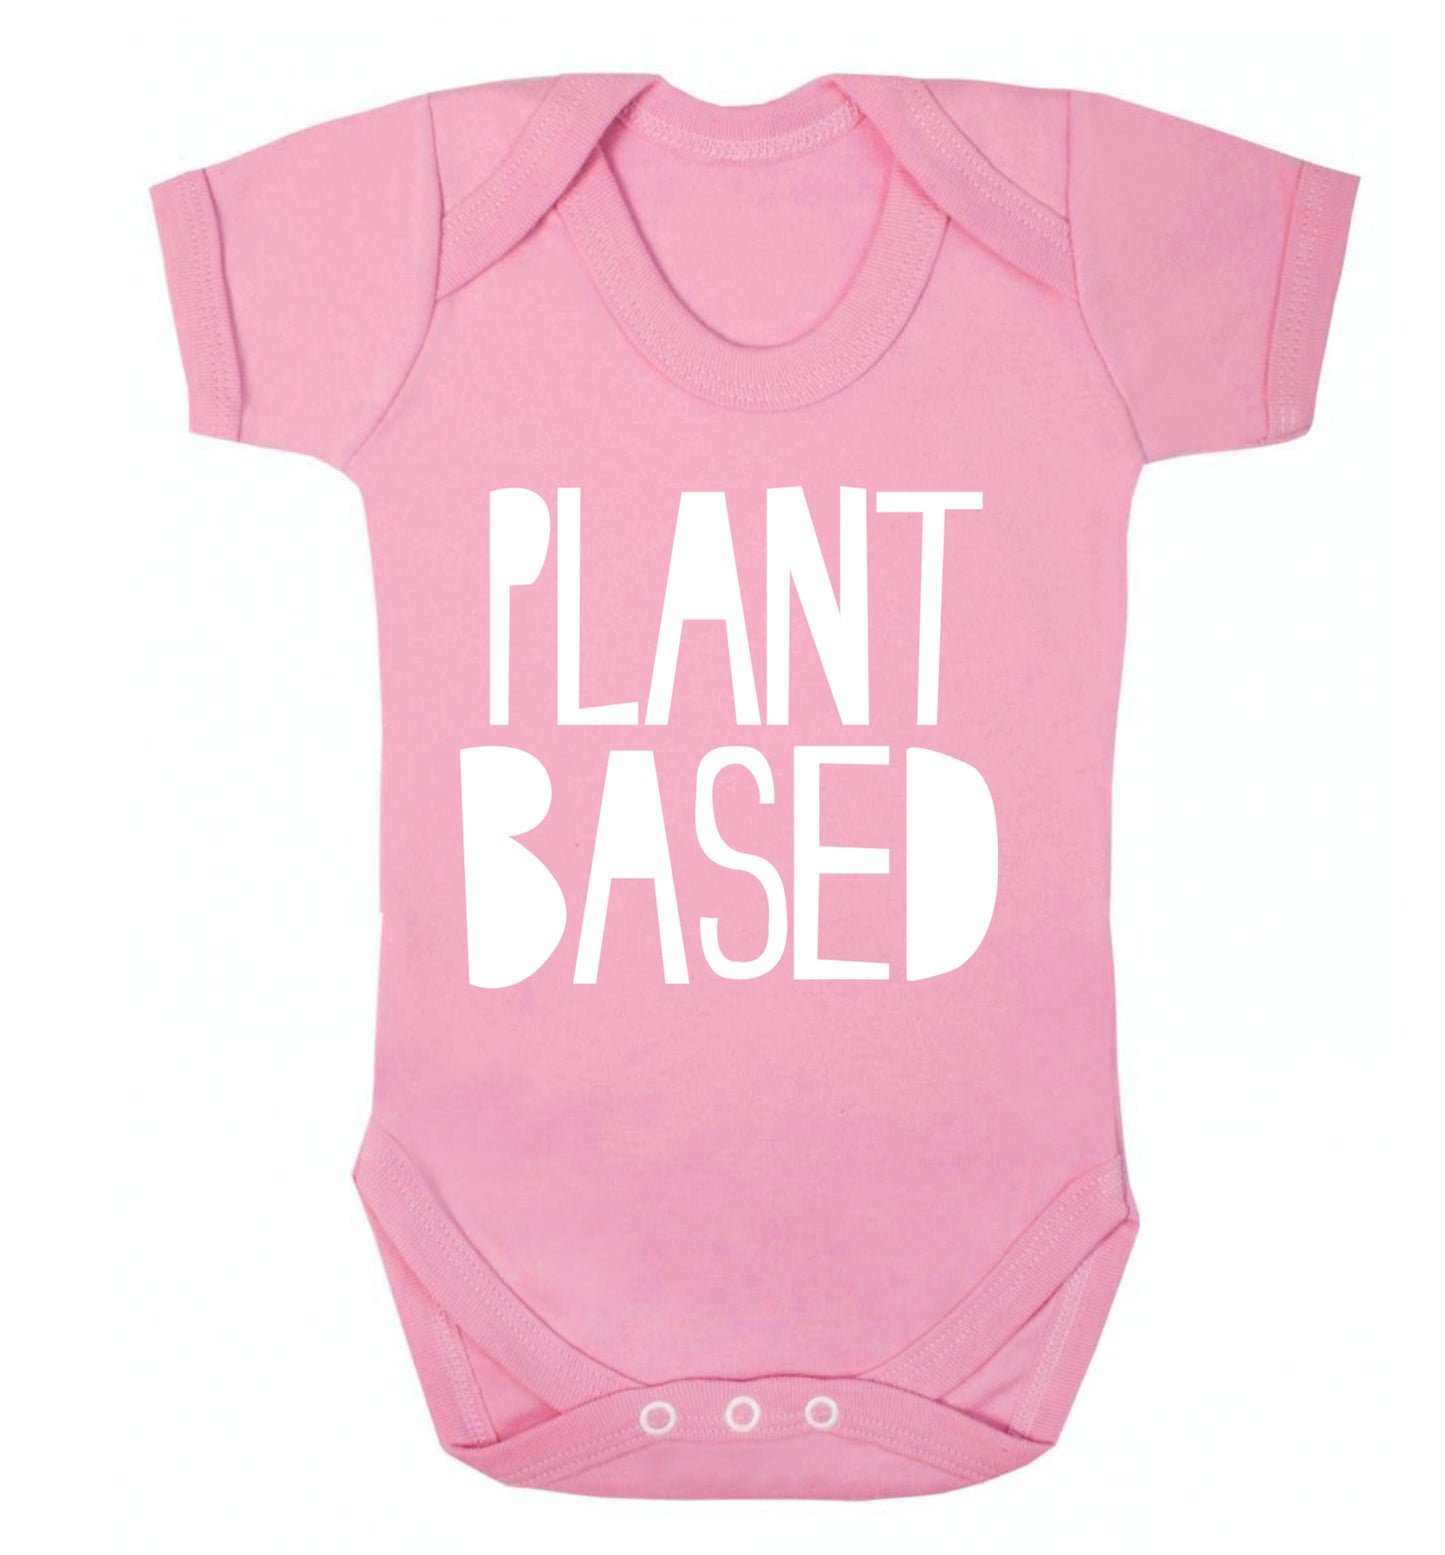 Plant Based Baby Vest pale pink 18-24 months